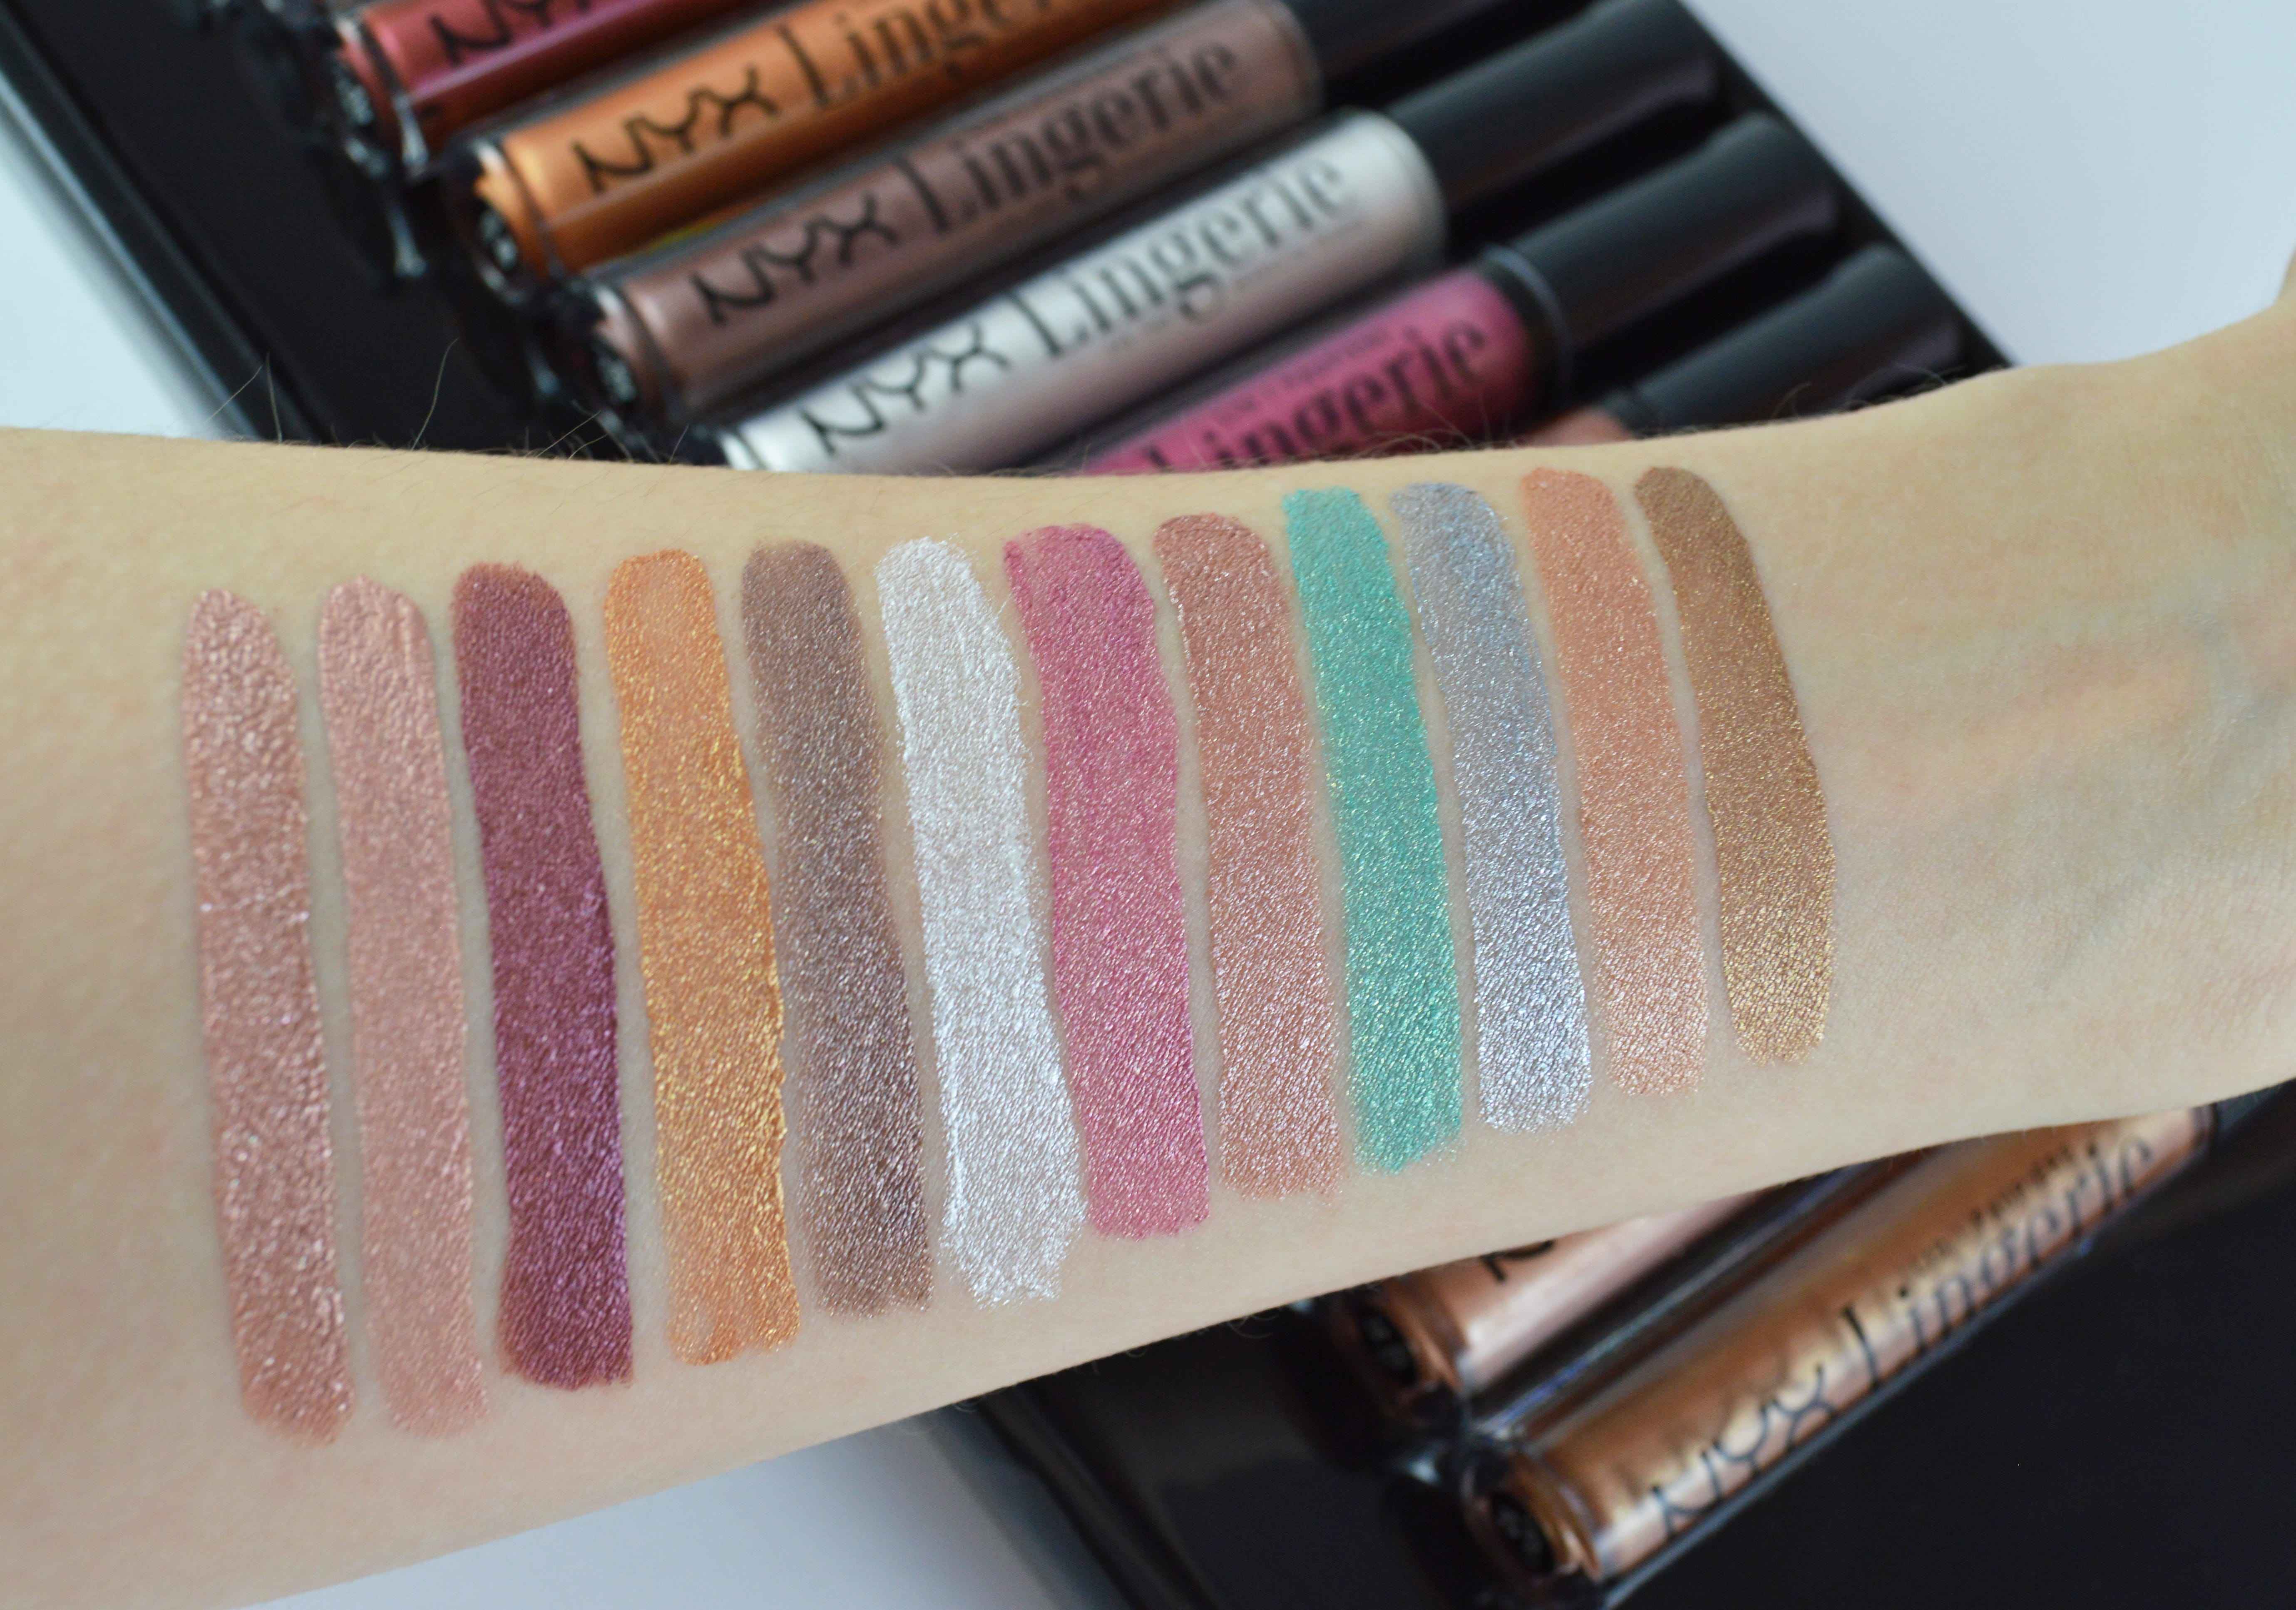 NYX Lid Lingerie Swatches